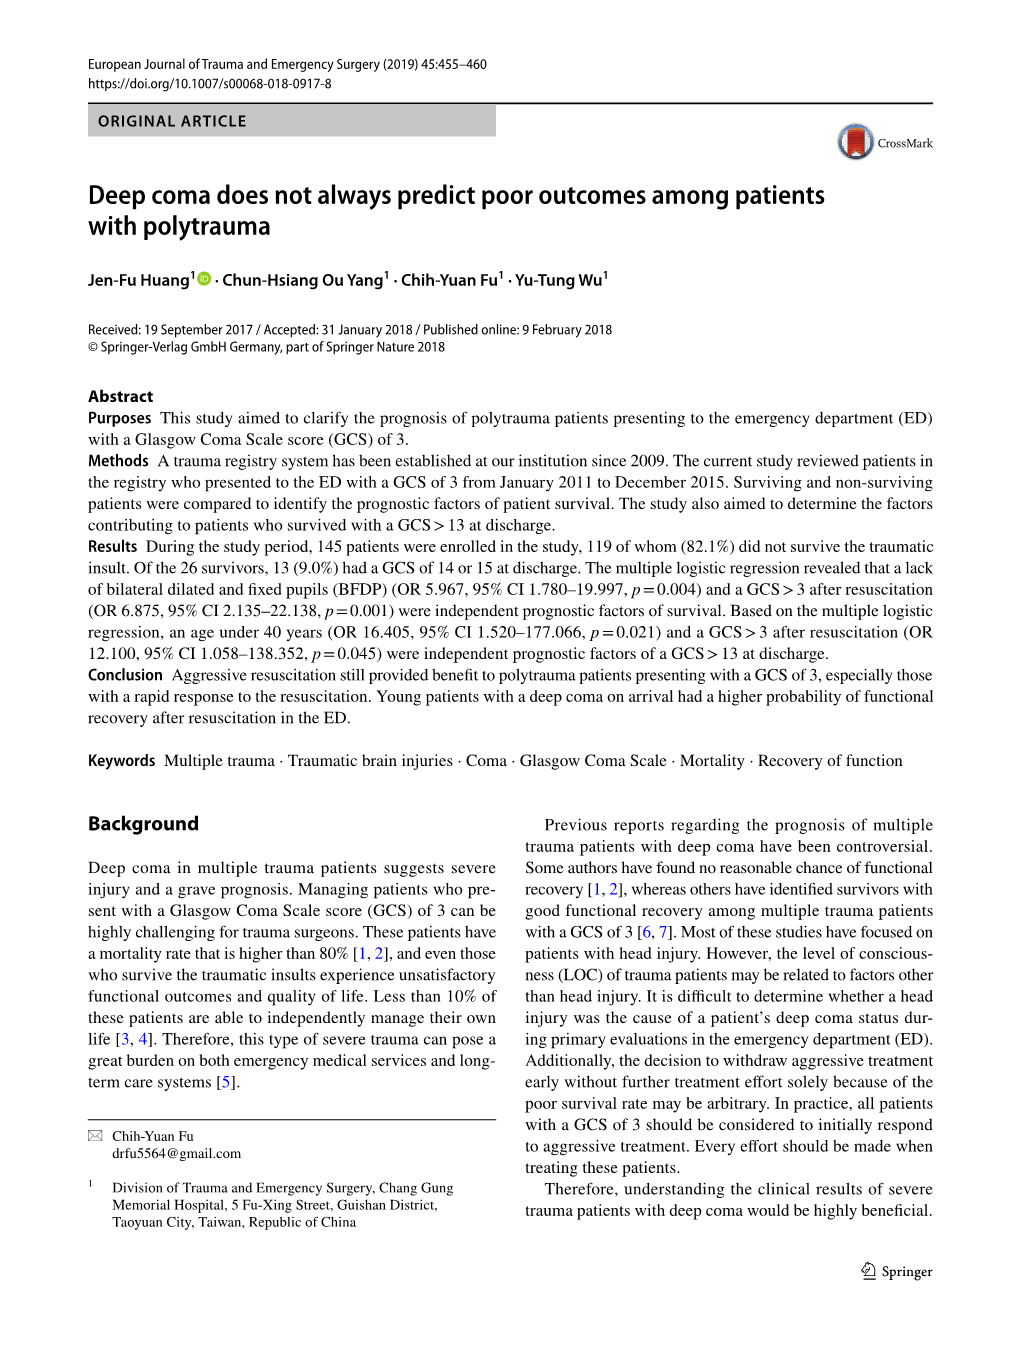 Deep Coma Does Not Always Predict Poor Outcomes Among Patients with Polytrauma